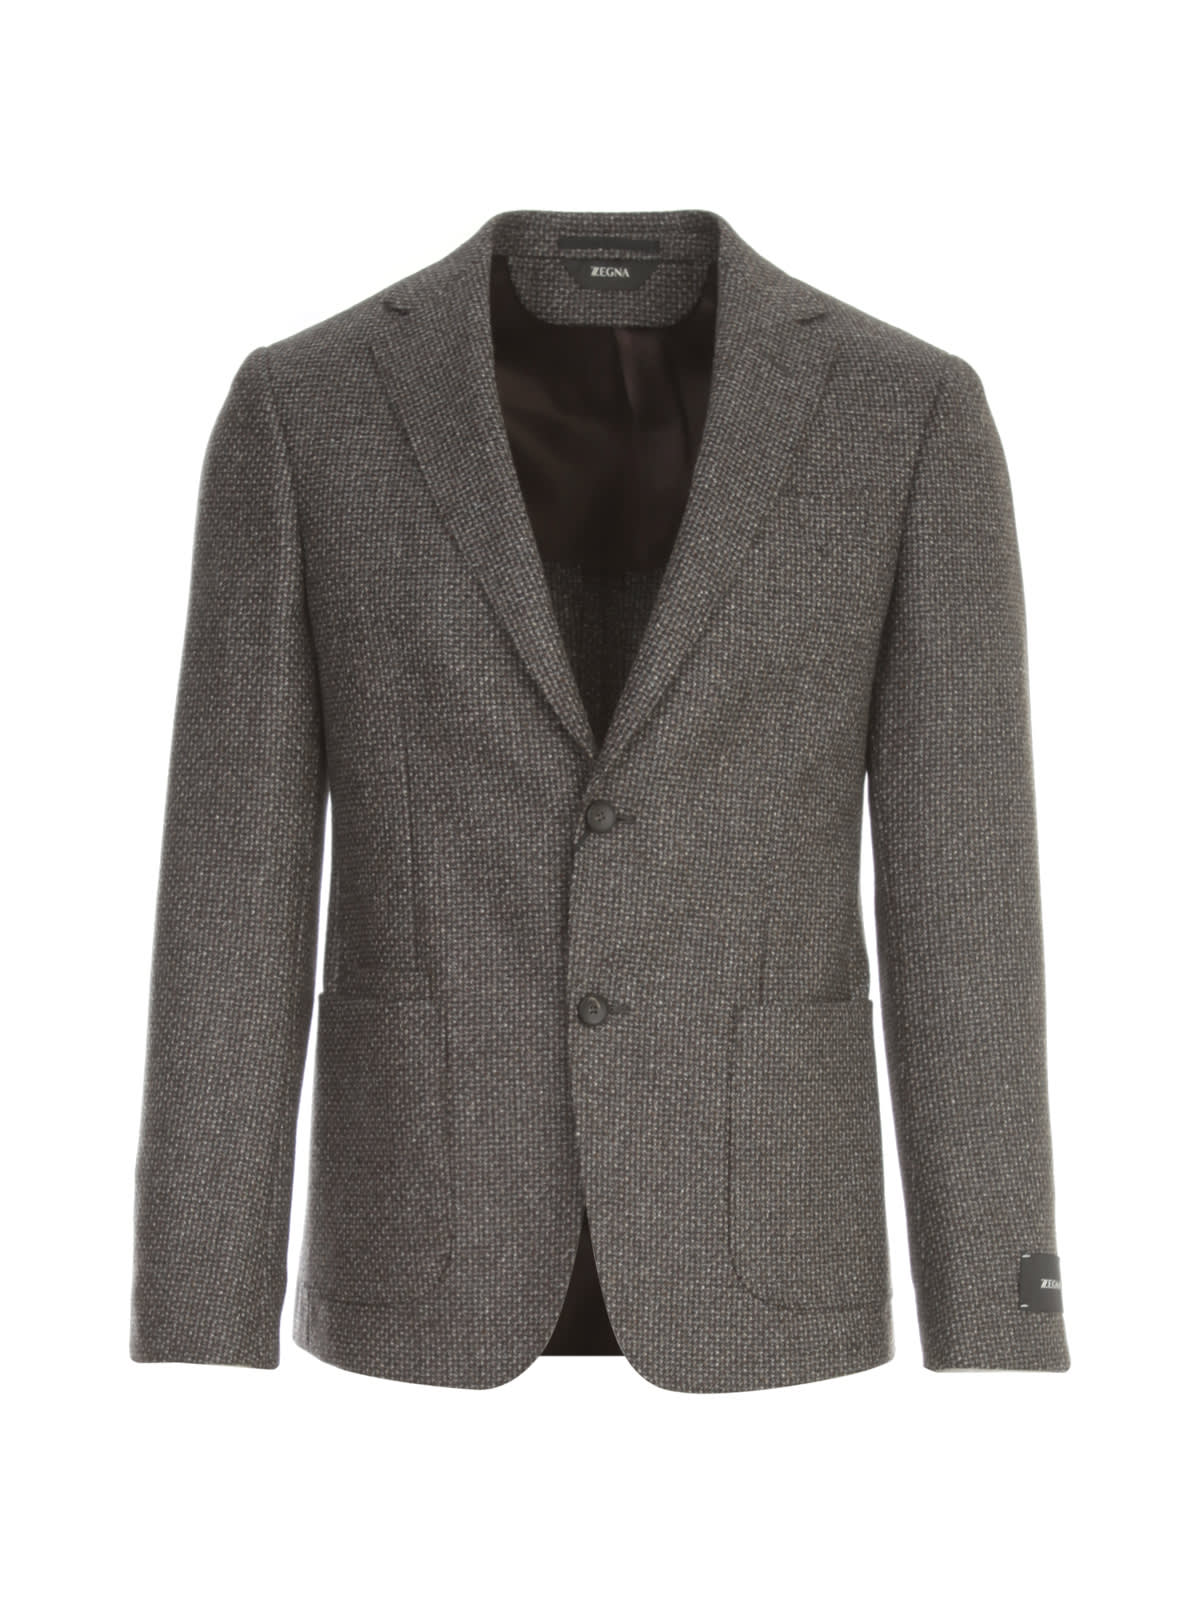 Z Zegna Lambswool And Cashmere Single Breasted Jacket W/patch